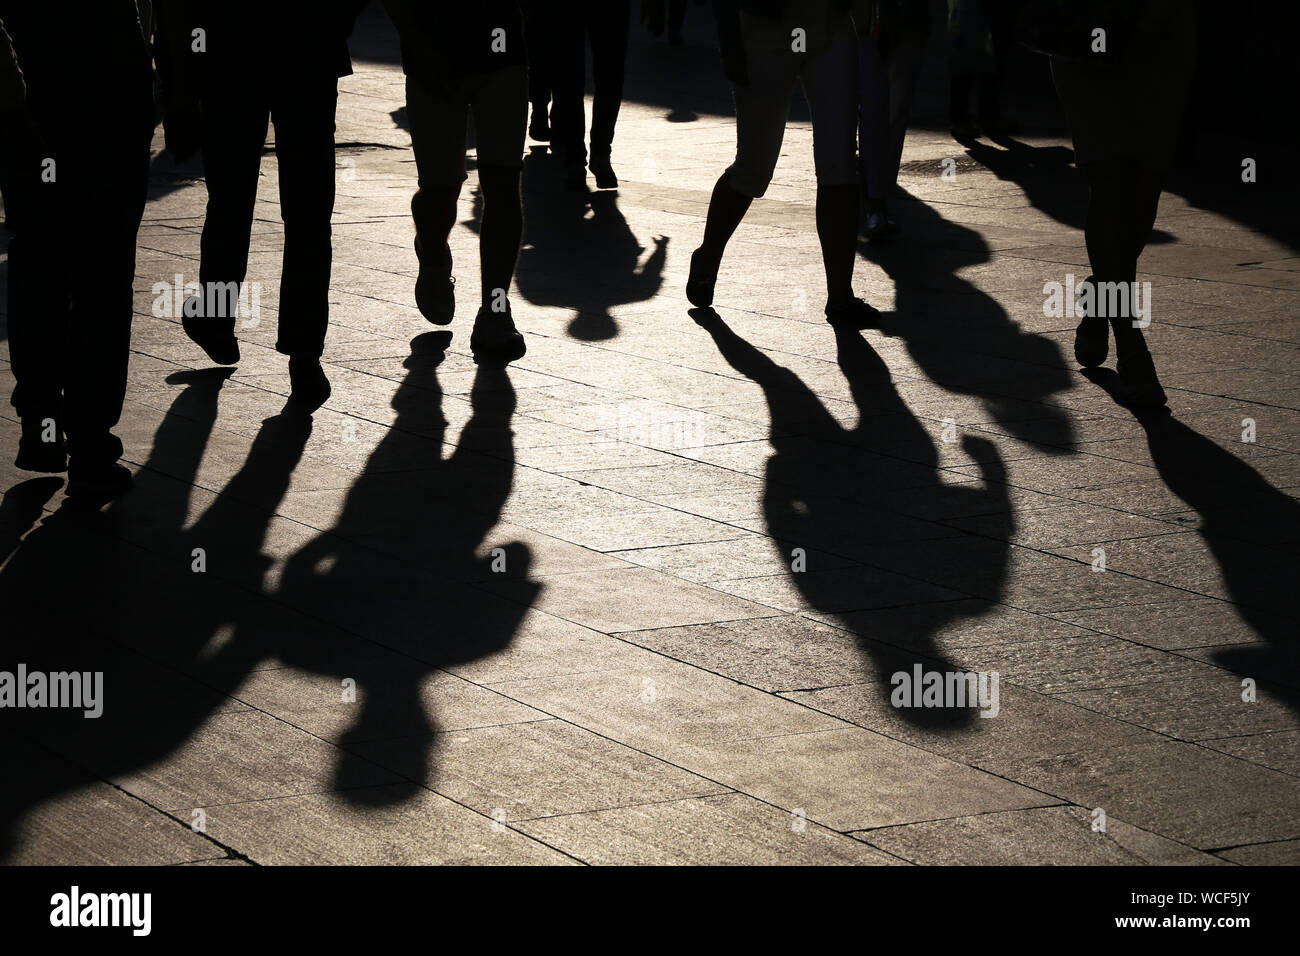 Black silhouettes and shadows of people on the street. Crowd walking down on sidewalk, concept of pedestrians, crime, society, city life Stock Photo